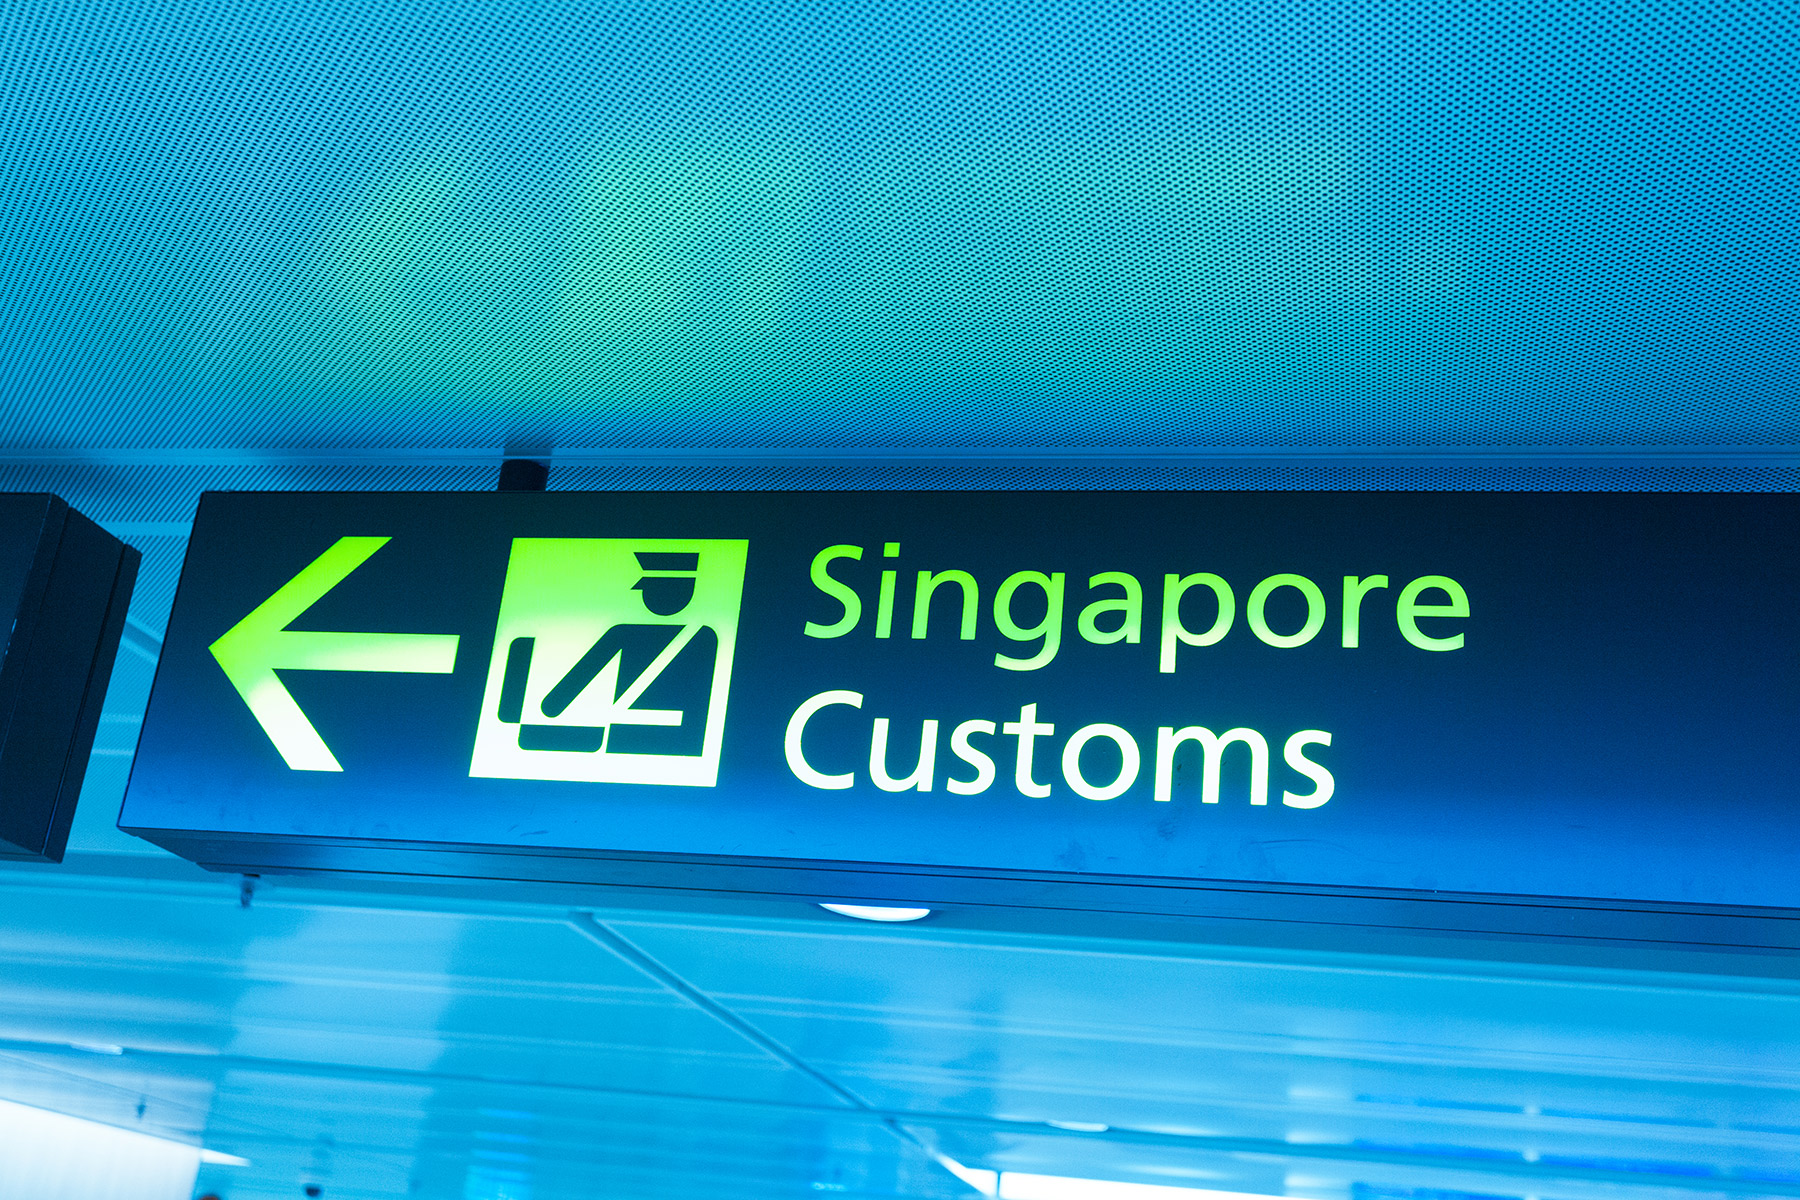 Sign in an airport saying "Singapore Customs"